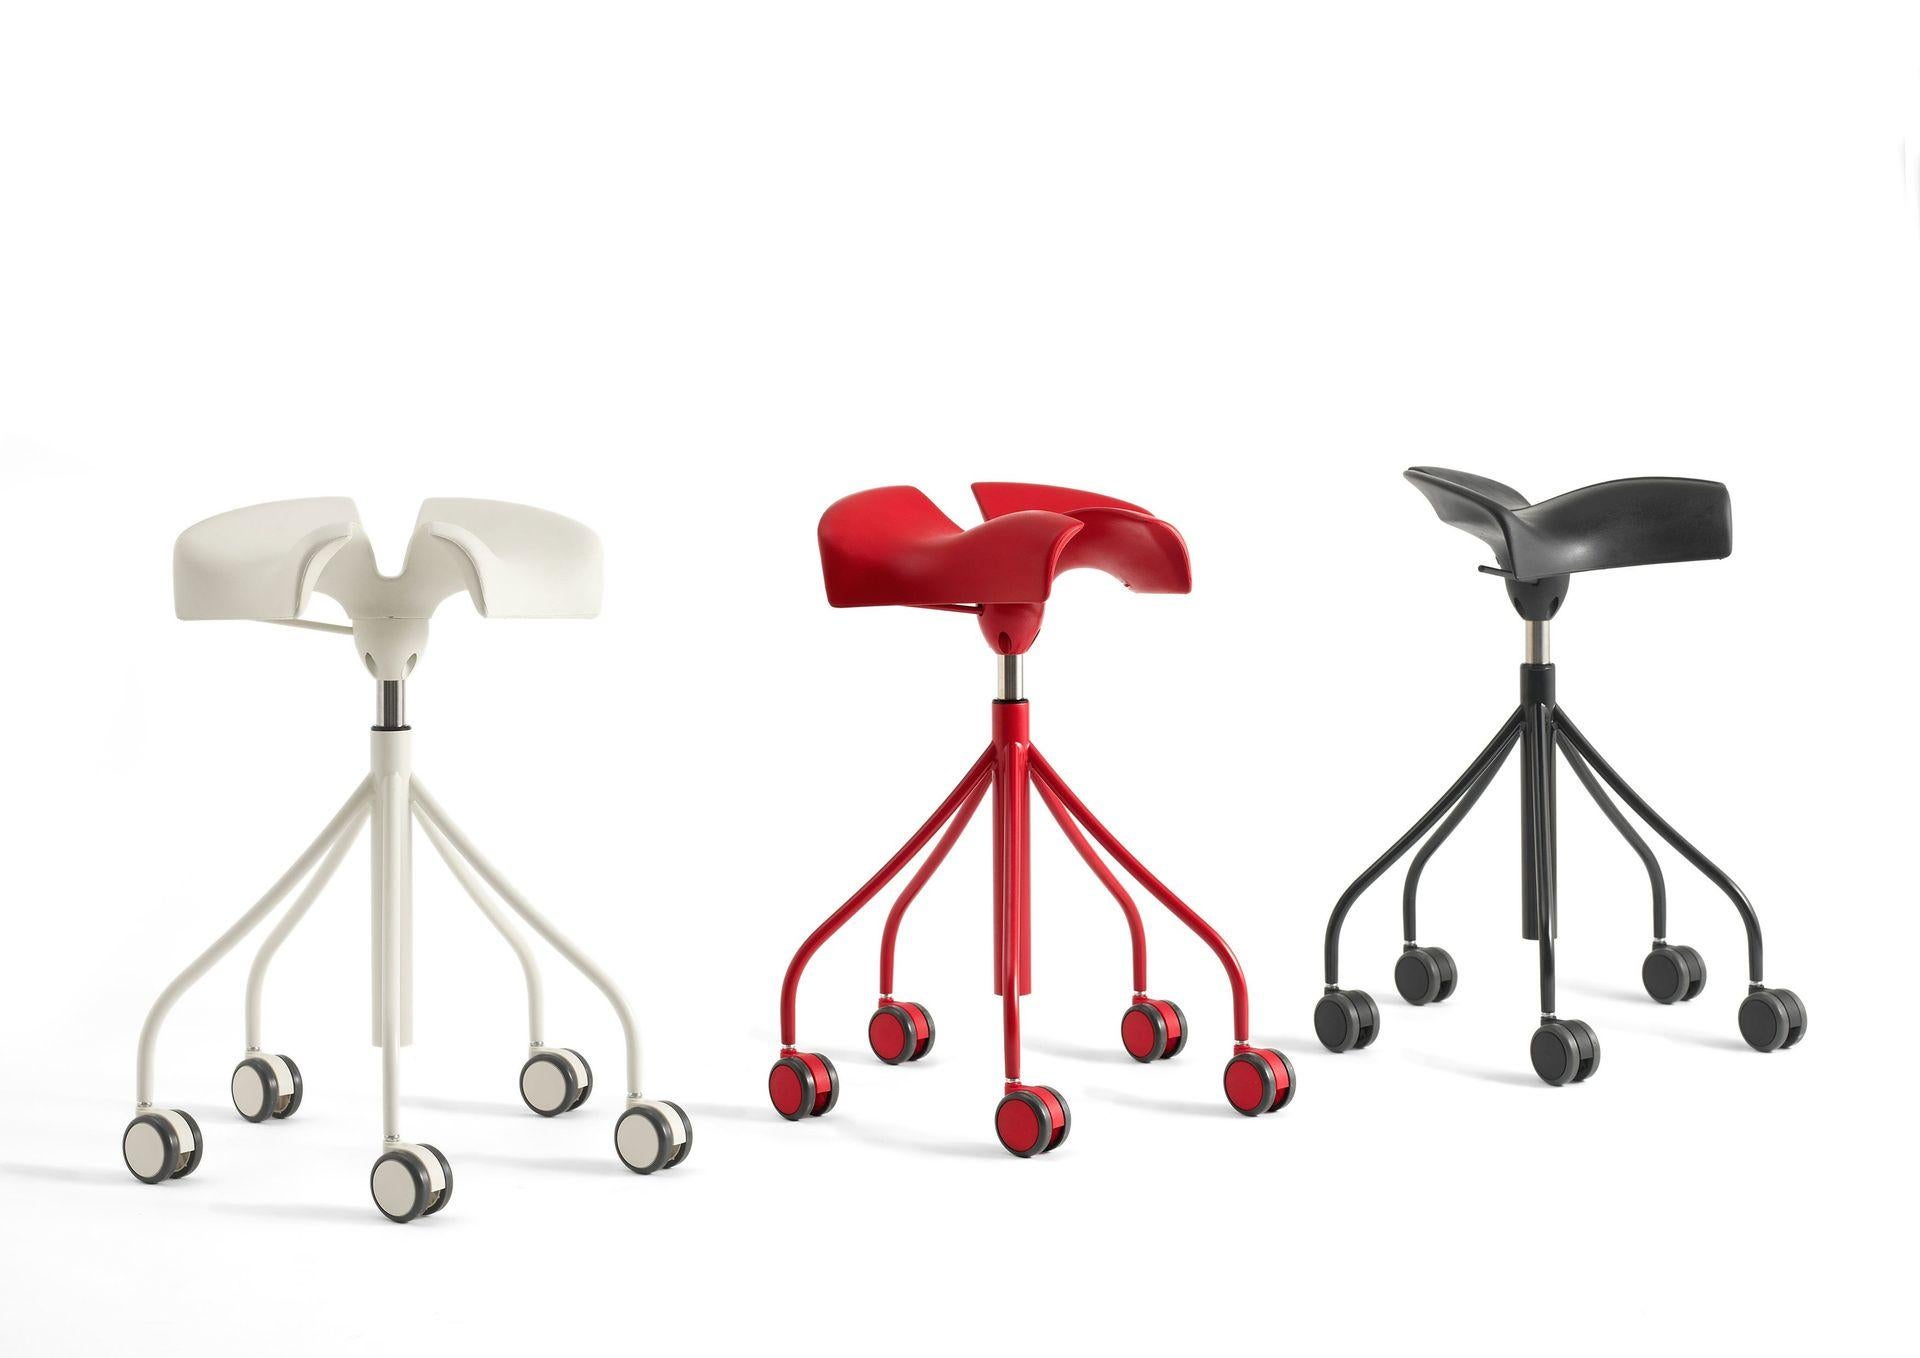 Set of Binaria stool by Otto Canalda & Jordi Badia
Dimensions: diameter 65 x height 82 cm 
Materials: steel structure and lever painted in a polyester powder coating and satin finish. Available in White RAL 1013, Red RAL 3002, or Black RAL 9005.